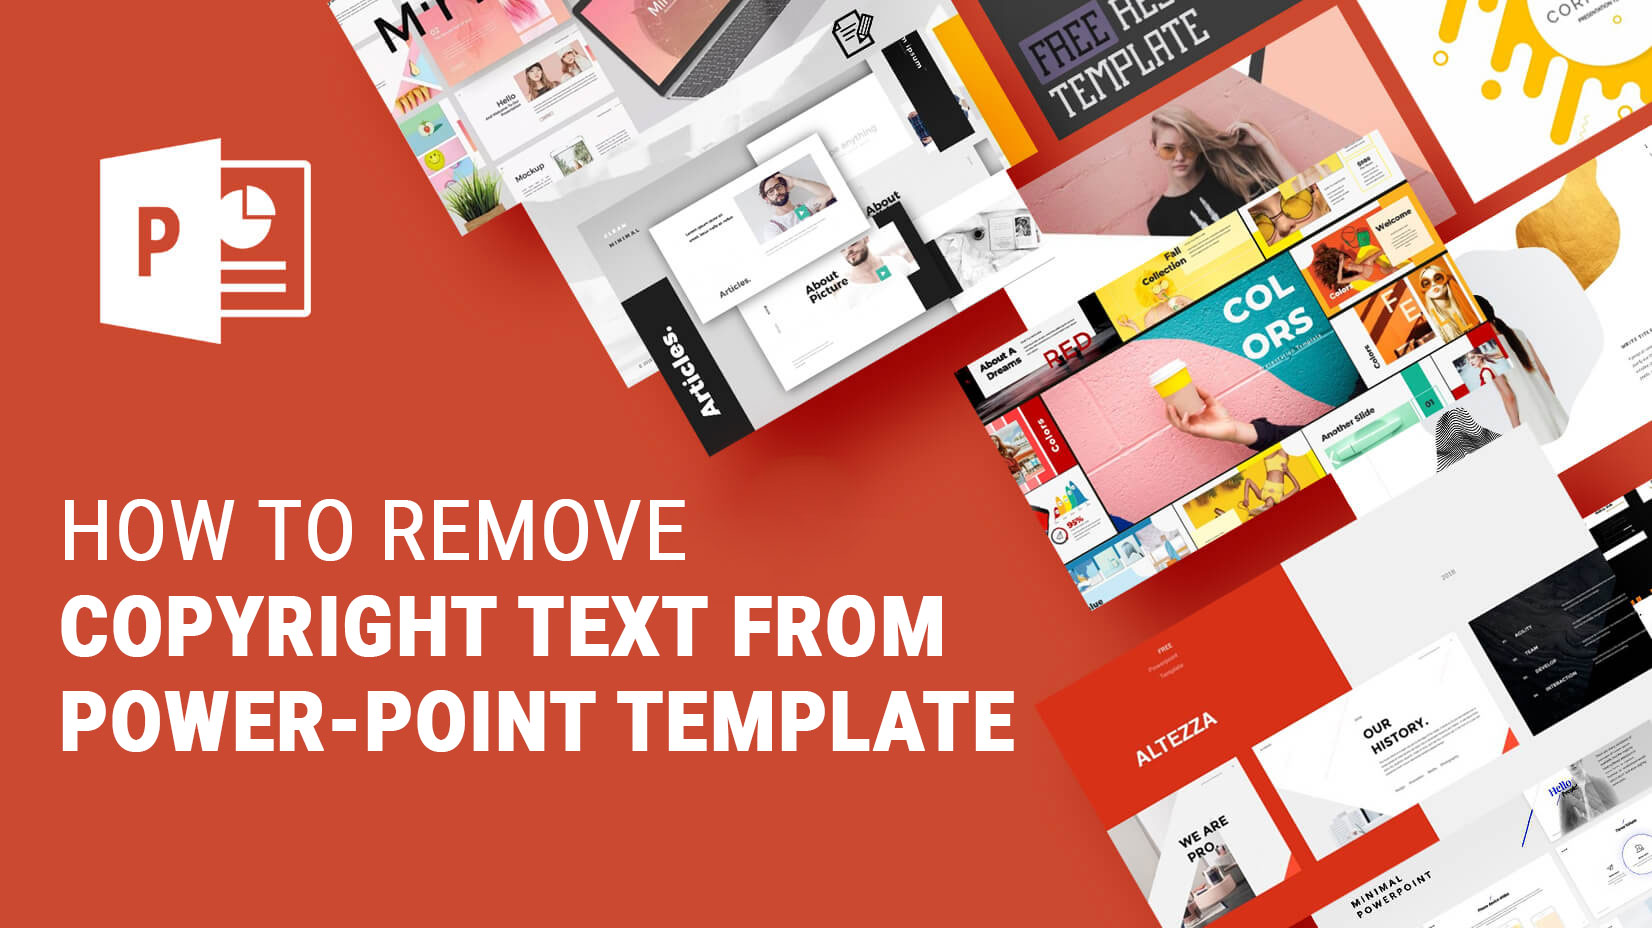 The-Best-Free-PowerPoint-Templates-to-Download-in-20191.jpg